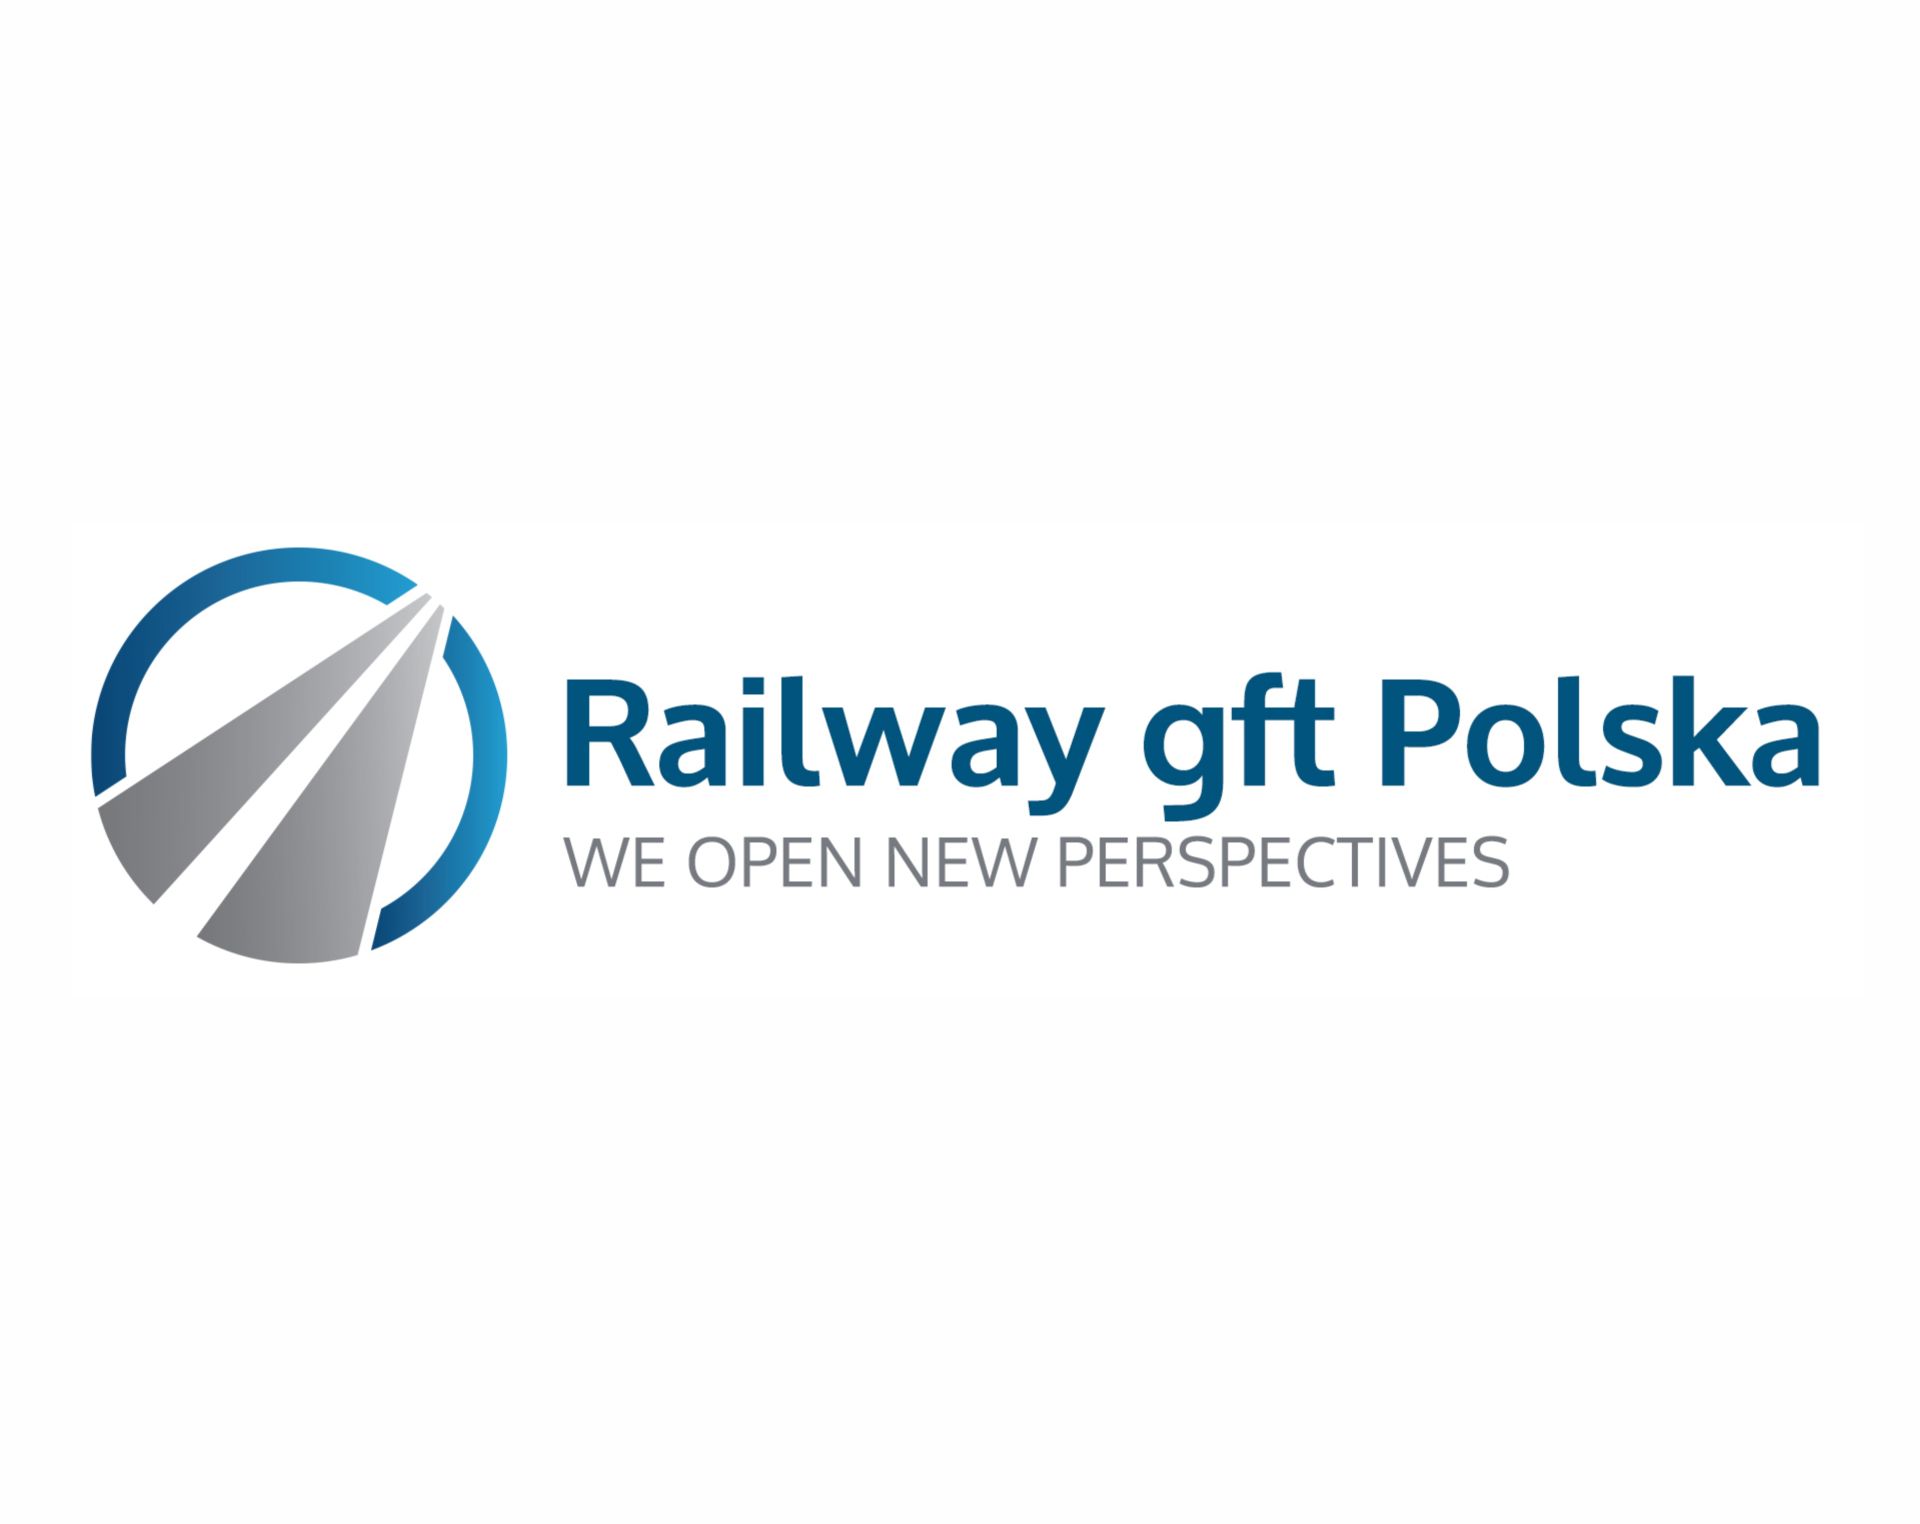 Letter of Intent Concerning ZUE S.A.’s Acquisition of 70% of Shares in Railway gft Polska Sp. z o.o.